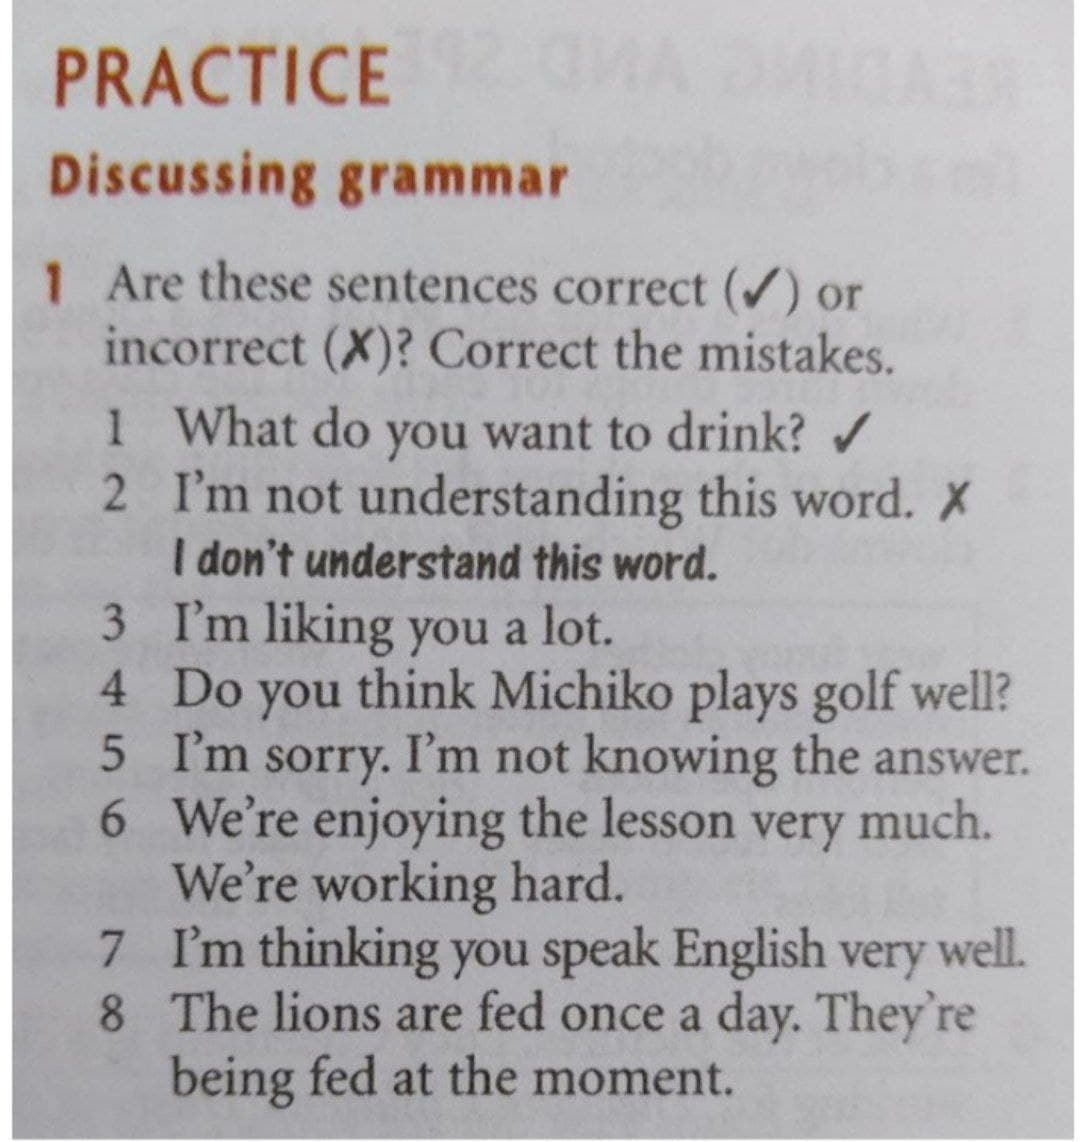 PRACTICE
Discussing grammar
1 Are these sentences correct () or
incorrect (X)? Correct the mistakes.
1 What do you want to drink? /
2 I'm not understanding this word. X
I don't understand this word.
3 I'm liking you a lot.
4 Do you think Michiko plays golf well?
5 I'm sorry. I'm not knowing the answer.
6 We're enjoying the lesson very much.
We're working hard.
7 I'm thinking you speak English very well.
8 The lions are fed once a day. They're
being fed at the moment.
